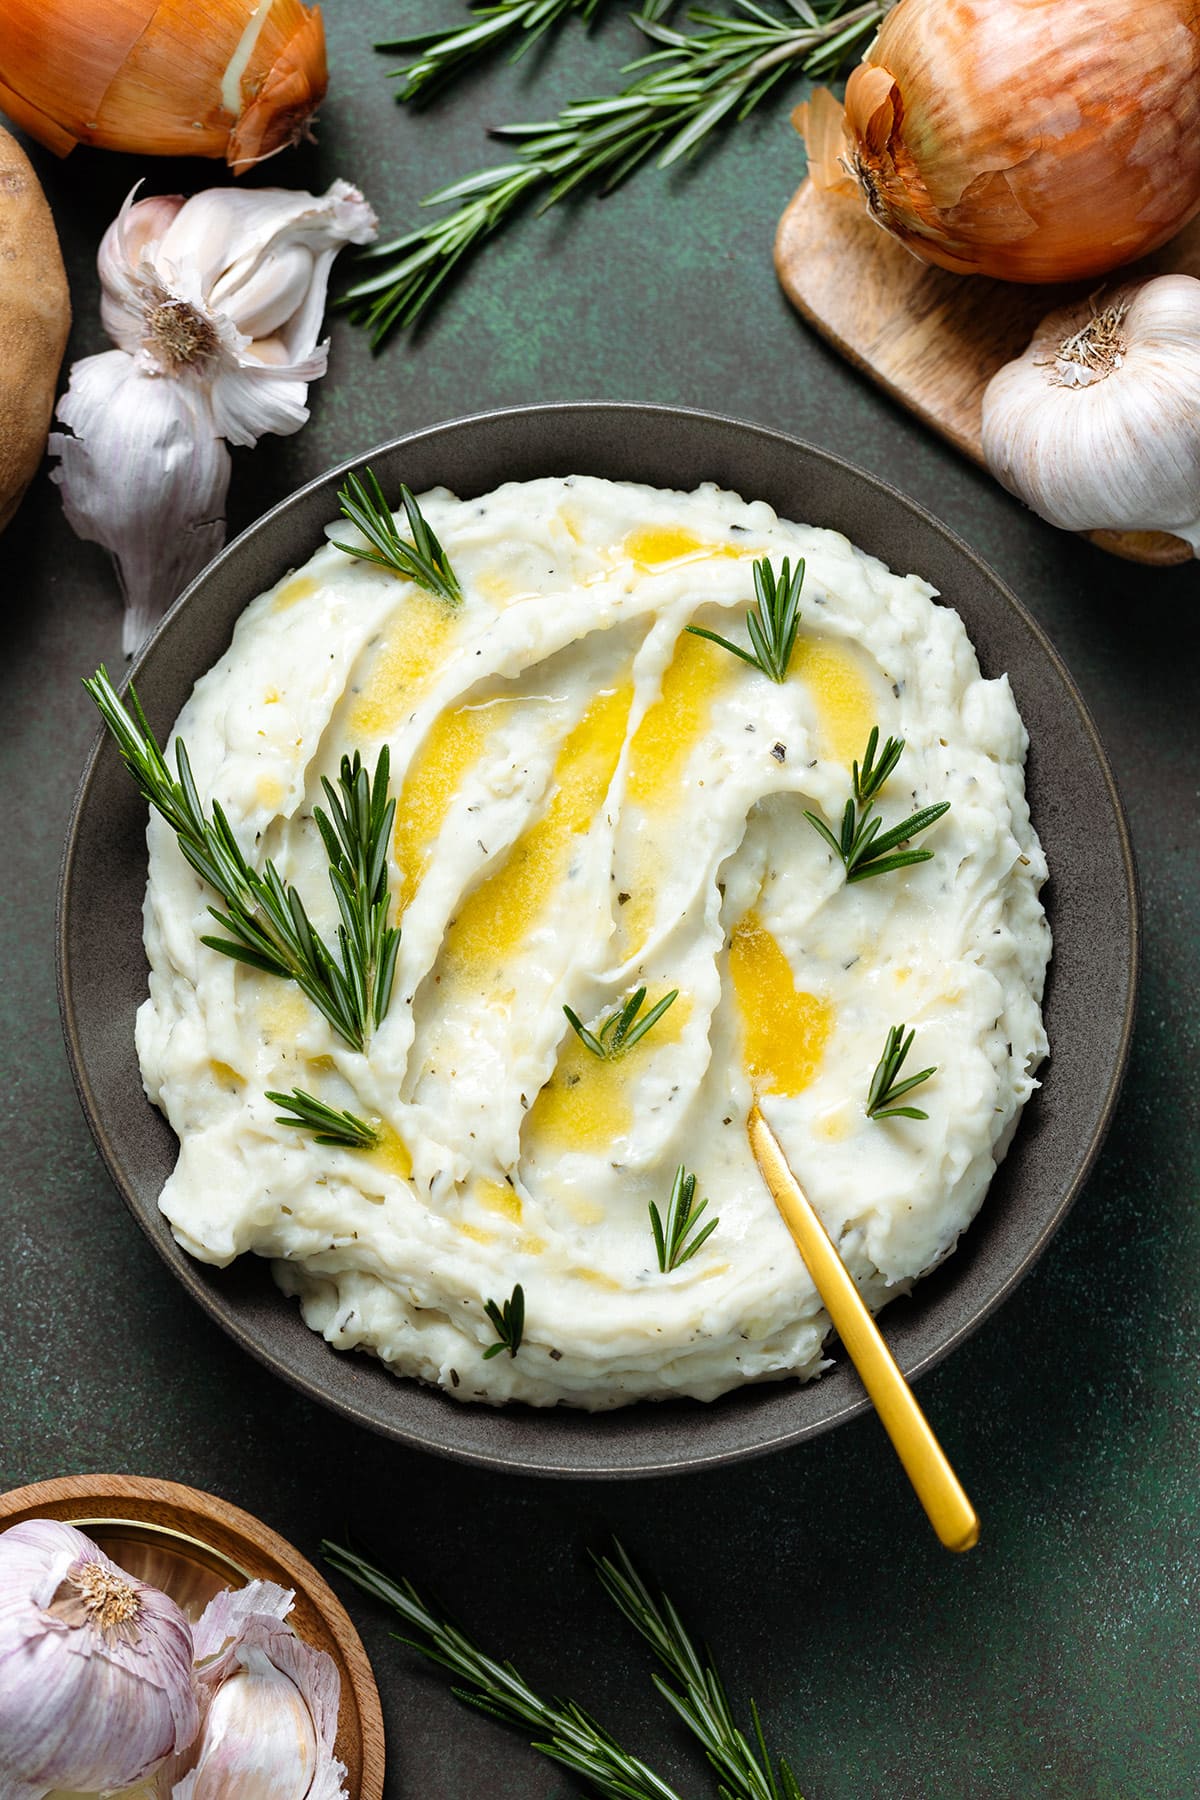 Mashed potatoes with fresh rosemary and melted butter in a black bowl with a gold spoon on the right side.